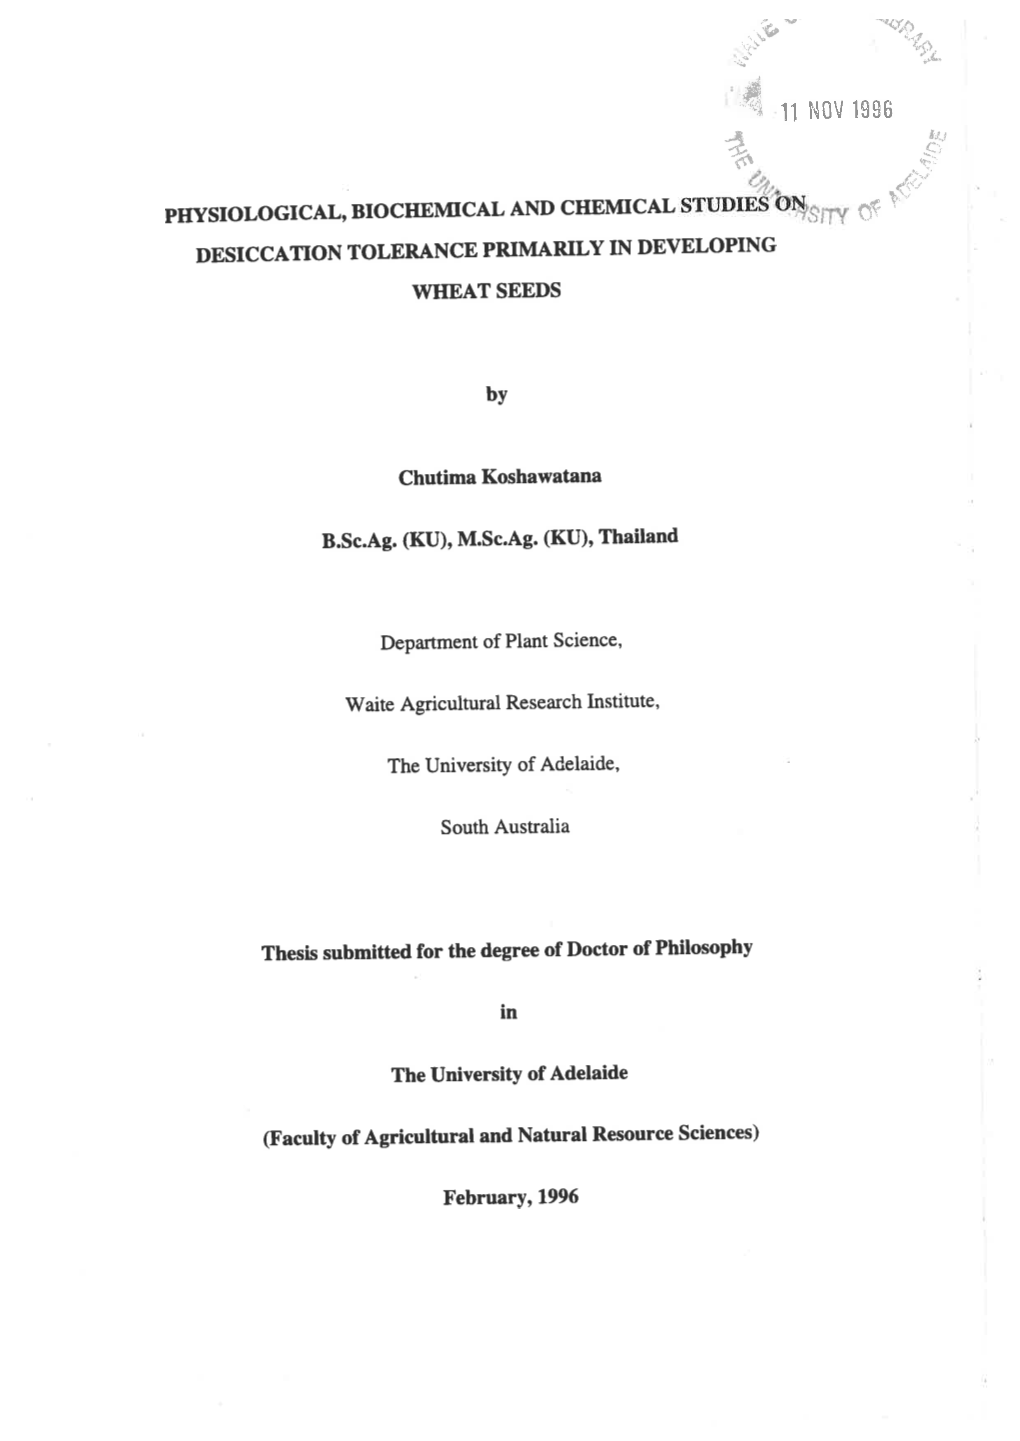 Physiological, Biochemical and Chemical Studies on Desiccation